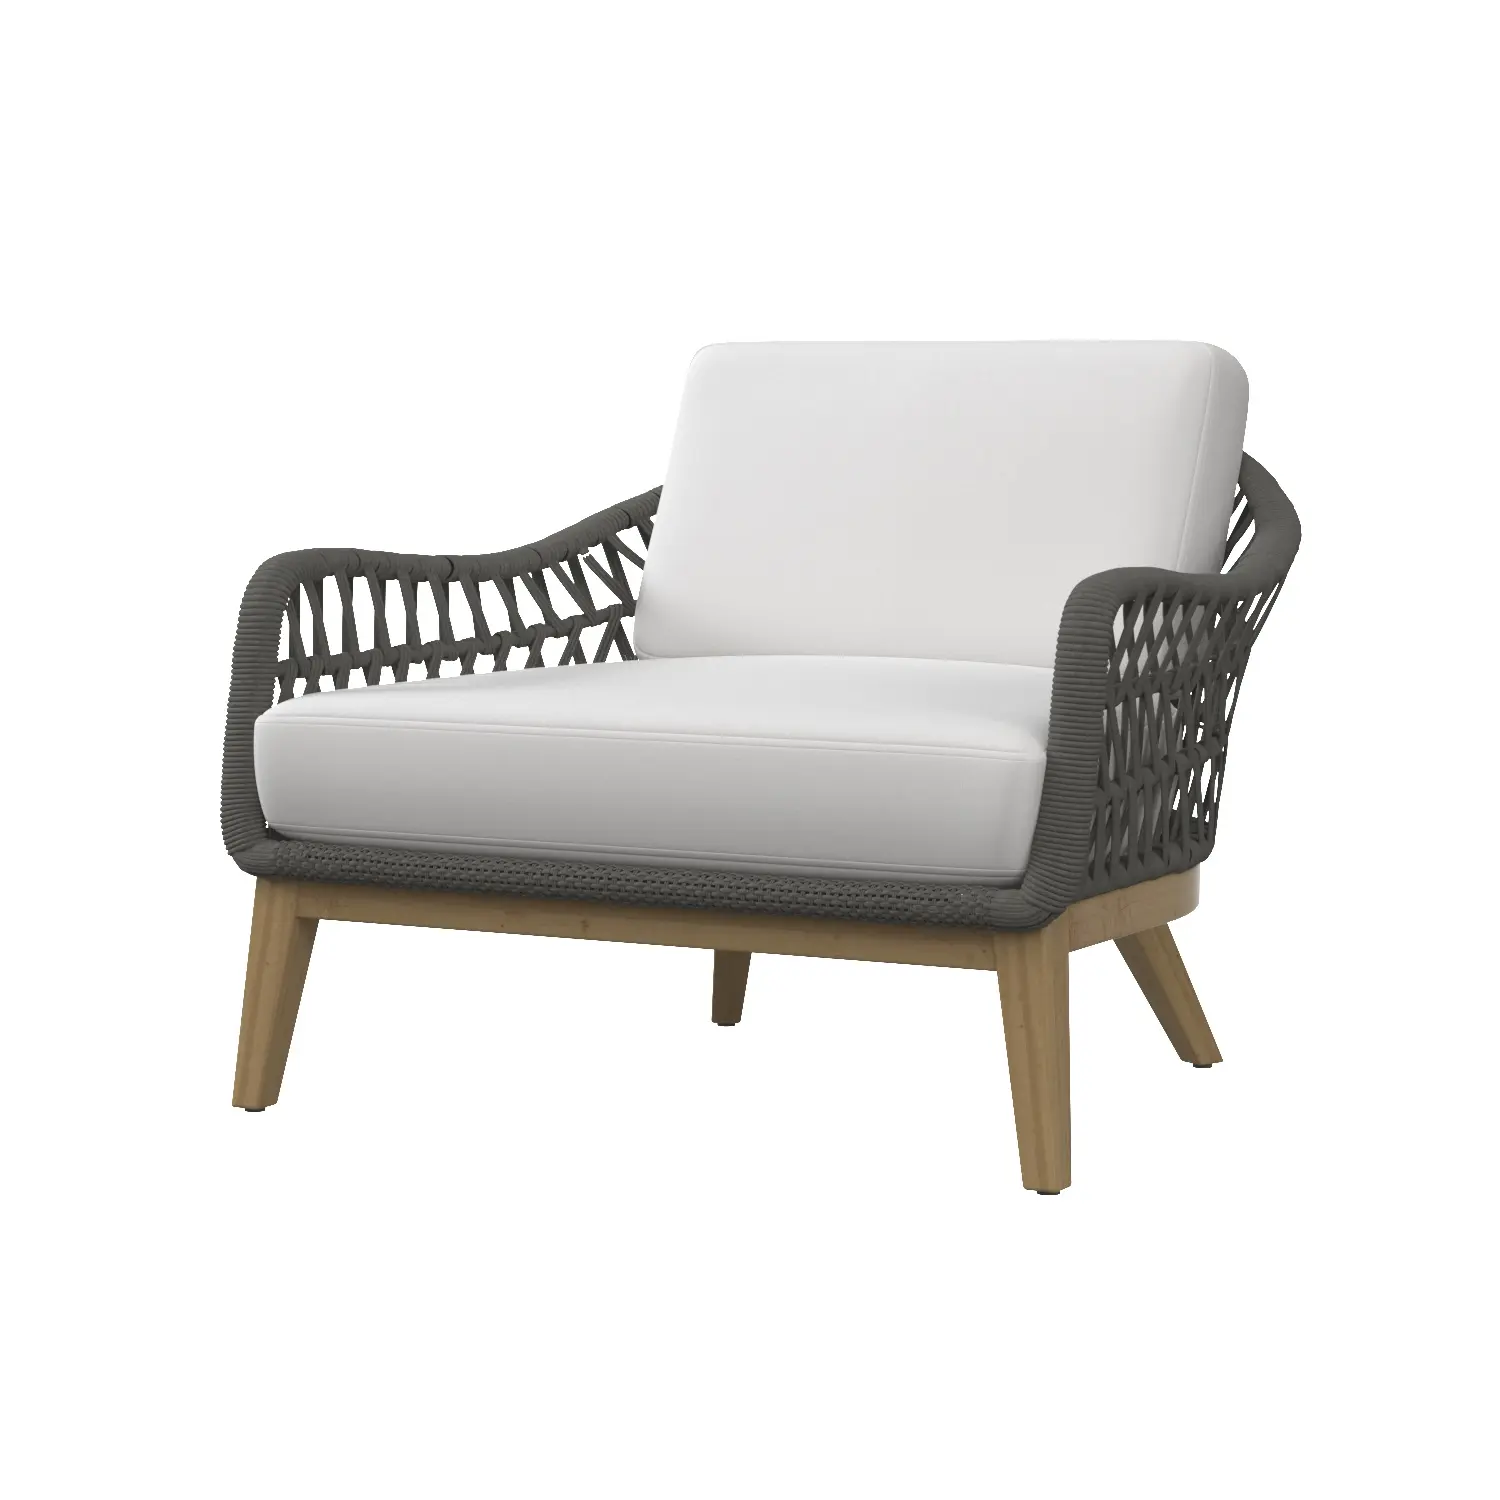 Napoli Outdoor Lounge Chair 3D Model_01